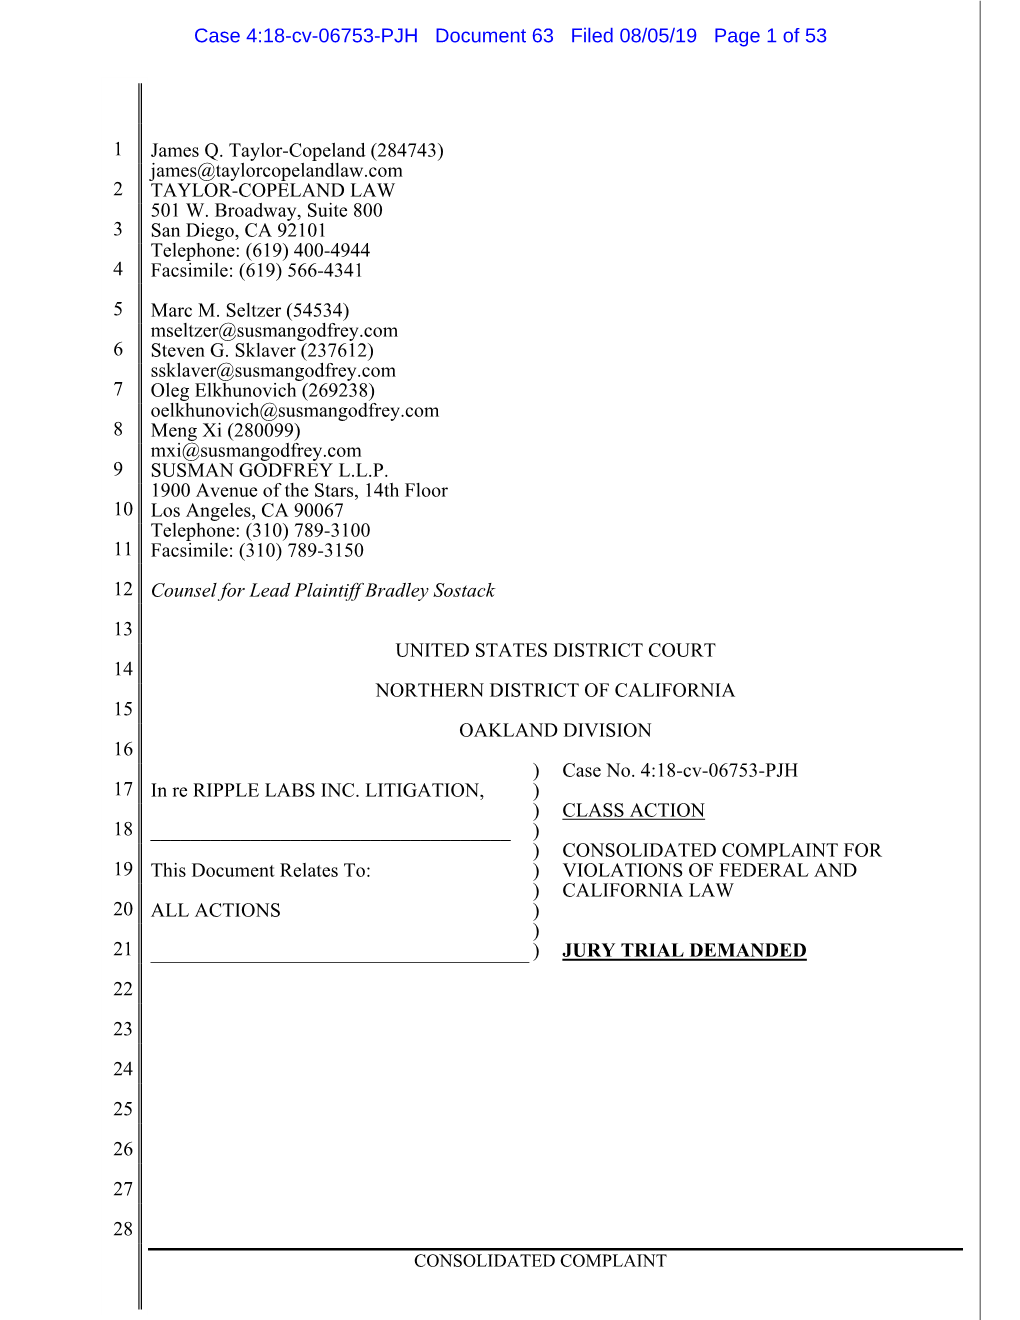 In Re Ripple Labs Inc. Litigation 18-CV-06753-Consolidated